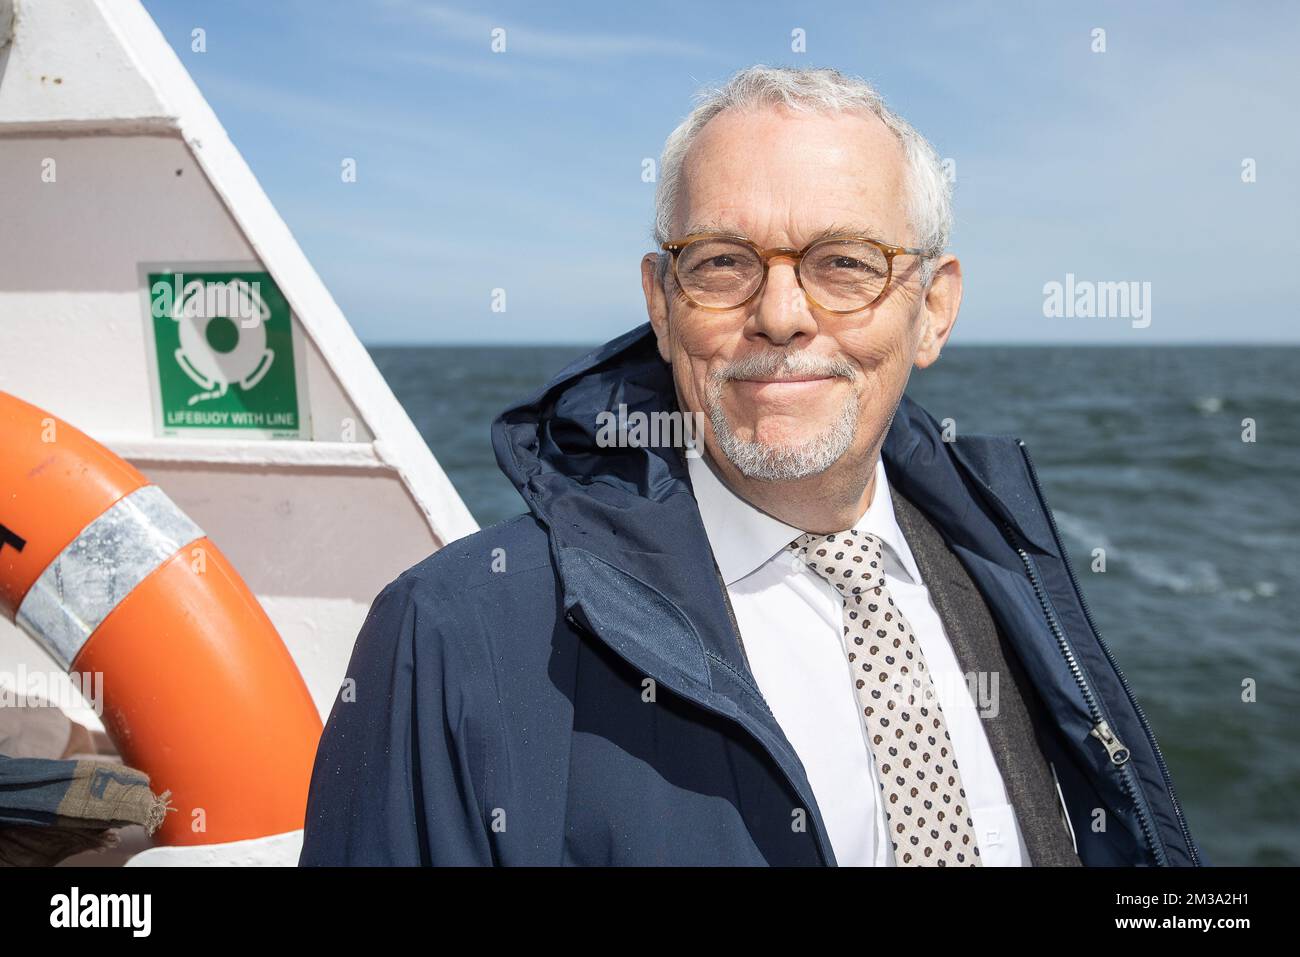 Colruyt Chairman and CEO Jef Colruyt pictured during a working visit to the offshore wind farms in the Belgian North Sea, in the port of Ostend, Friday 13 May 2022. Since the end of 2020, all 8 Belgian offshore wind farms (Norther, C-Power, Rentel, Northwind, Seamade (zones Seastar en Mermaid), Nobelwind, Belwind en Northwester II) have been operational, with a capacity of 2,262 MW. Belgium is in the world top with this. With the climate and energy crisis, exacerbated for several months by the war in Ukraine, Belgium wants to continue to focus on the production of green electricity in our Nort Stock Photo